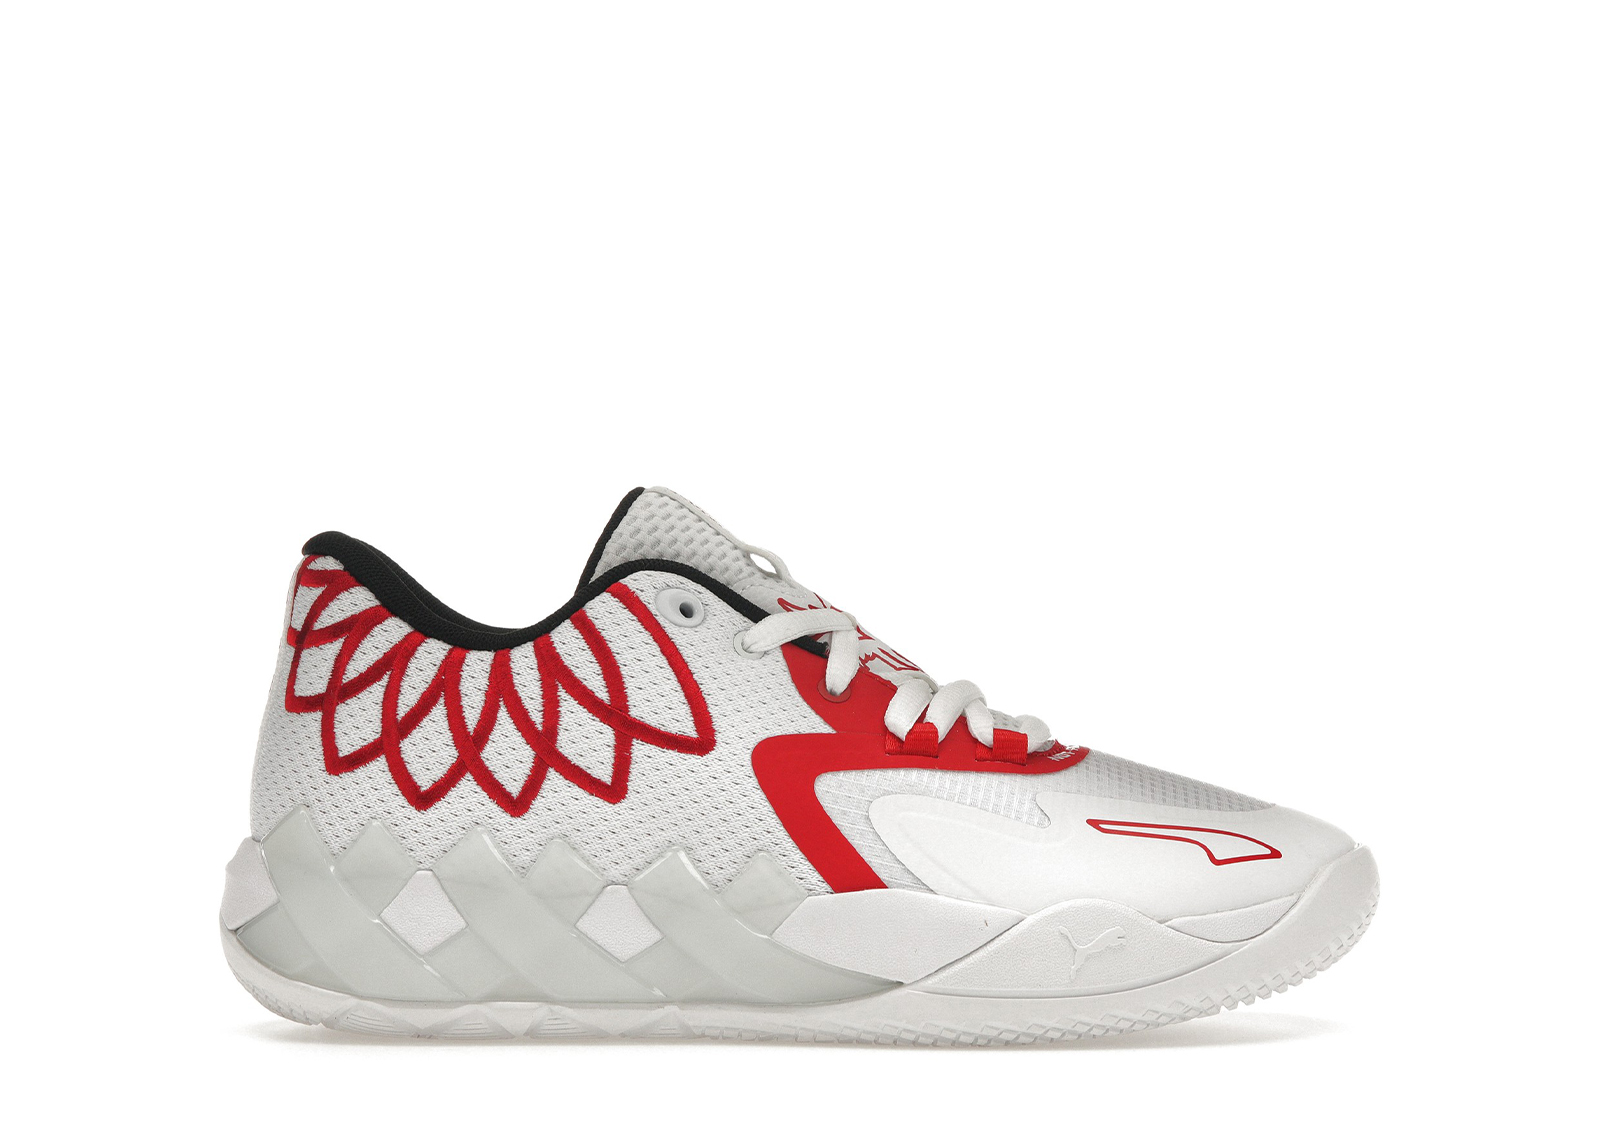 Puma LaMelo Ball MB.01 Lo Team Color White High Risk Red (GS) Kids